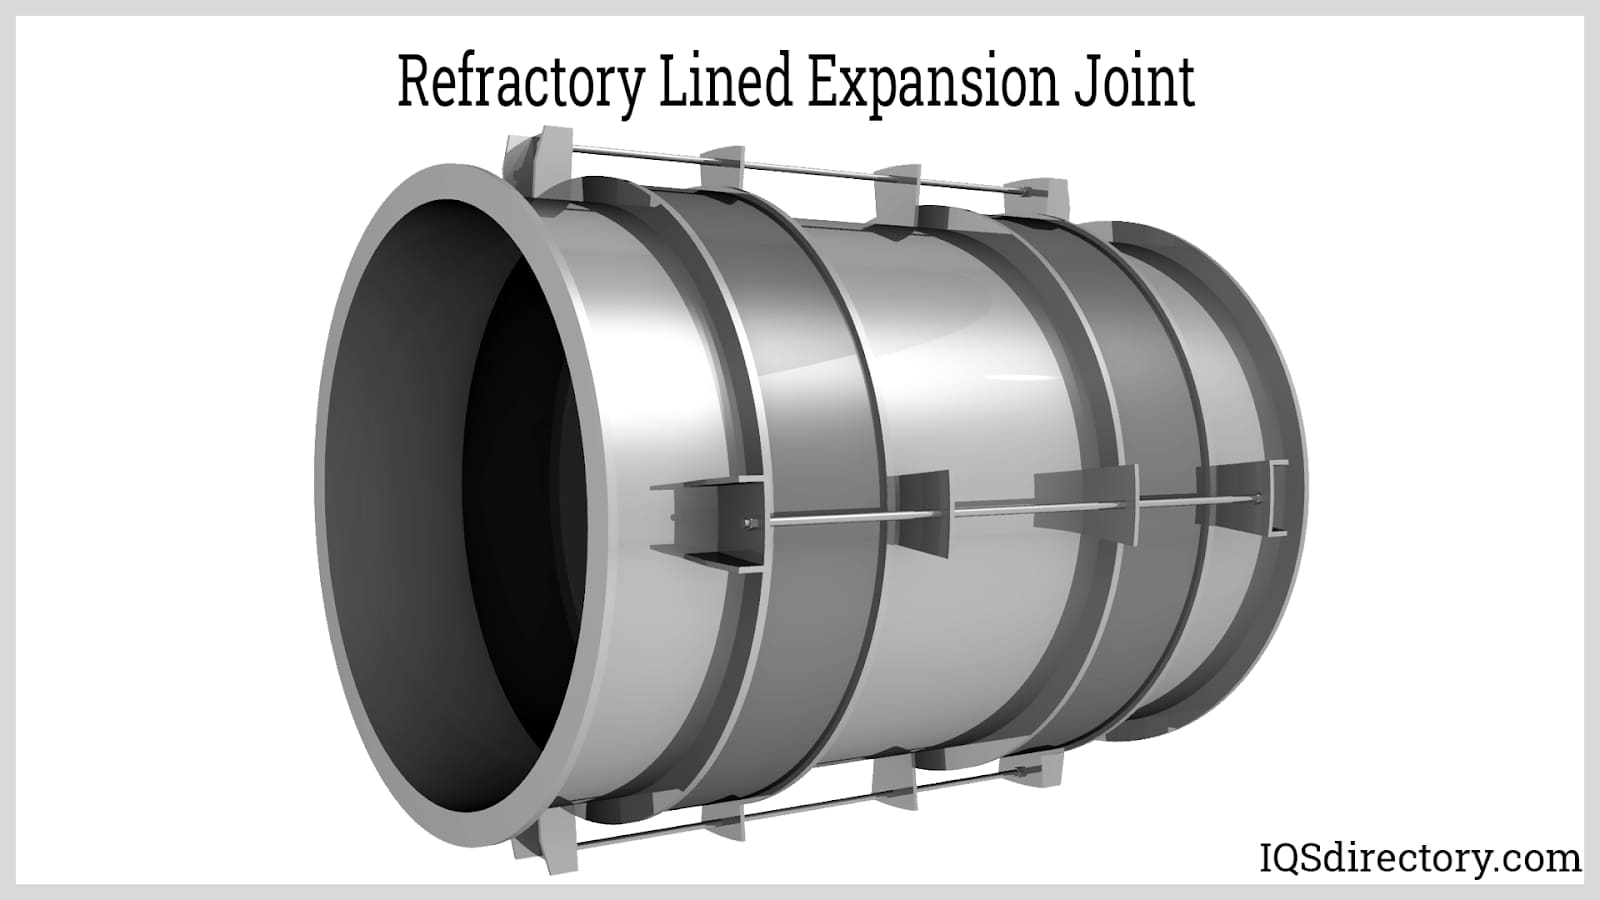 Refactory Lined Expansion Joint